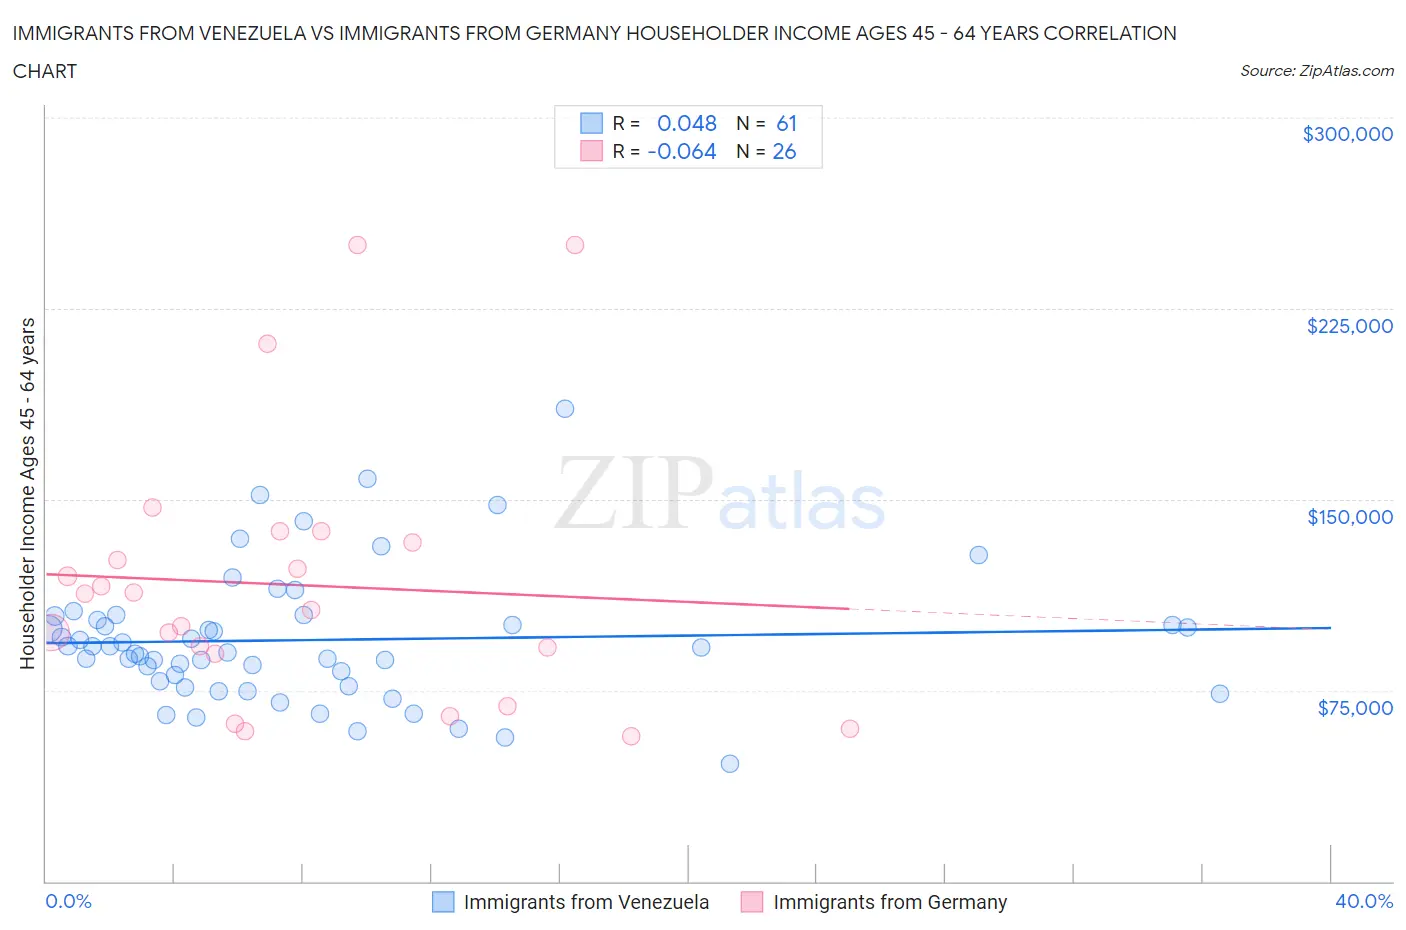 Immigrants from Venezuela vs Immigrants from Germany Householder Income Ages 45 - 64 years